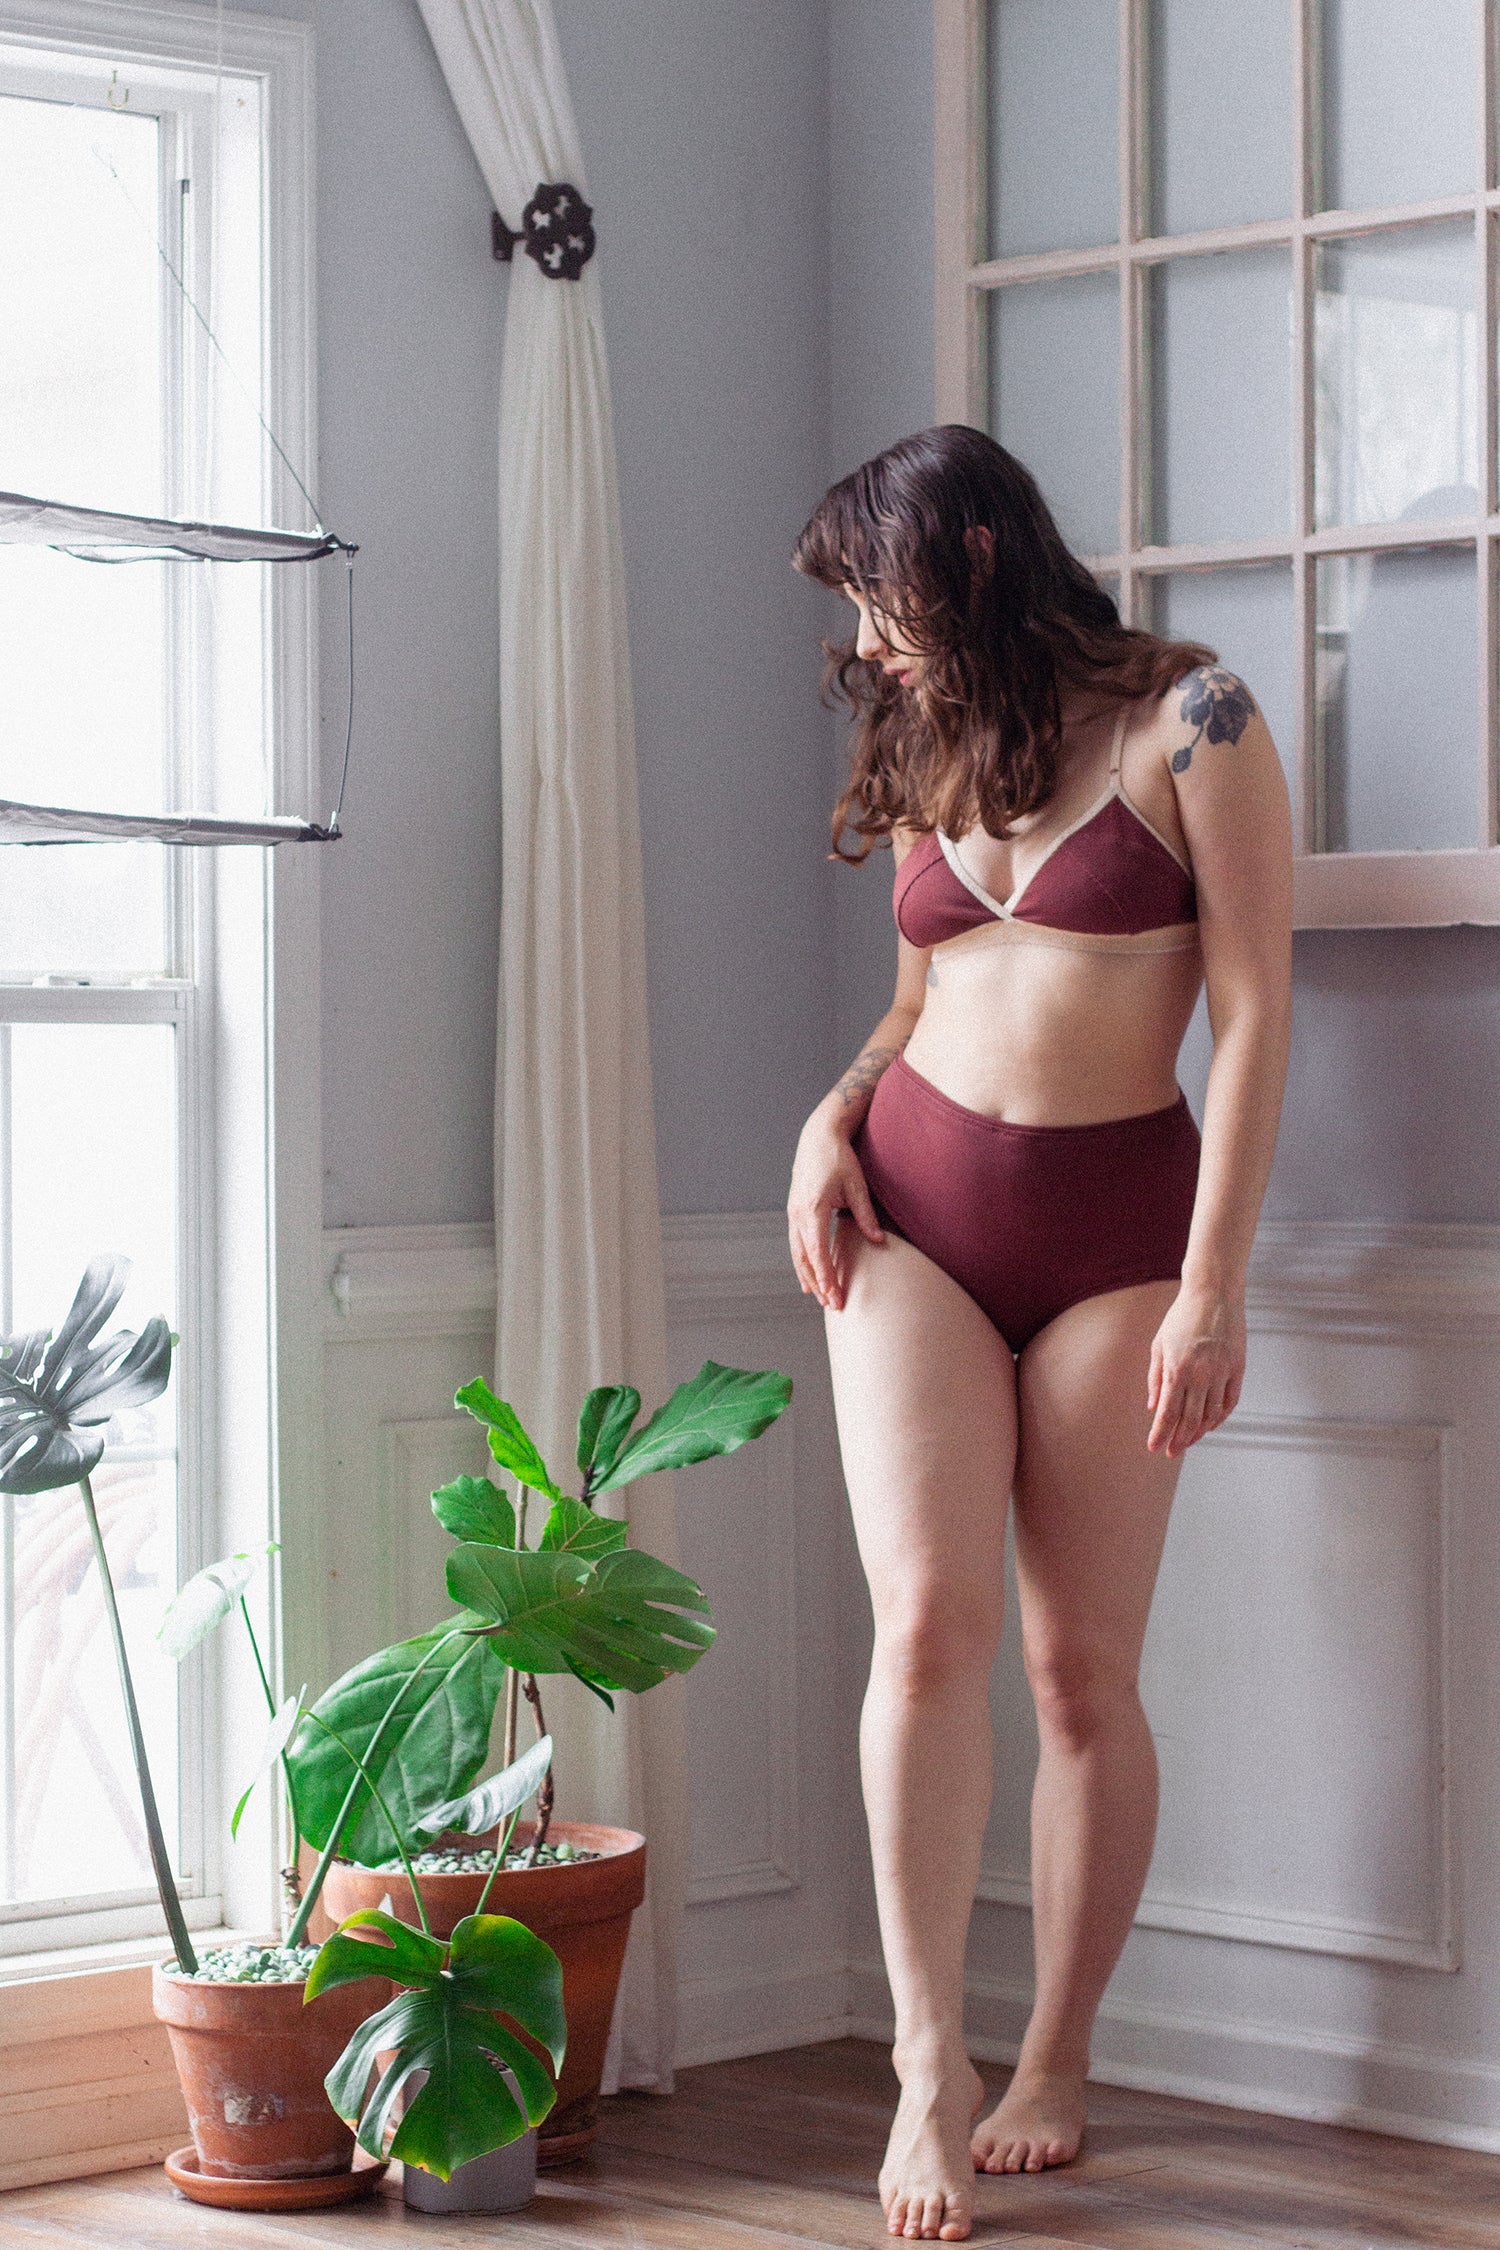 Women wearing the Lavande Undies sewing pattern from Untitled Thoughts on The Fold Line. A briefs pattern made in Knit fabric with at least 40% stretch, featuring a high waist, curved gusset, and full bum coverage.